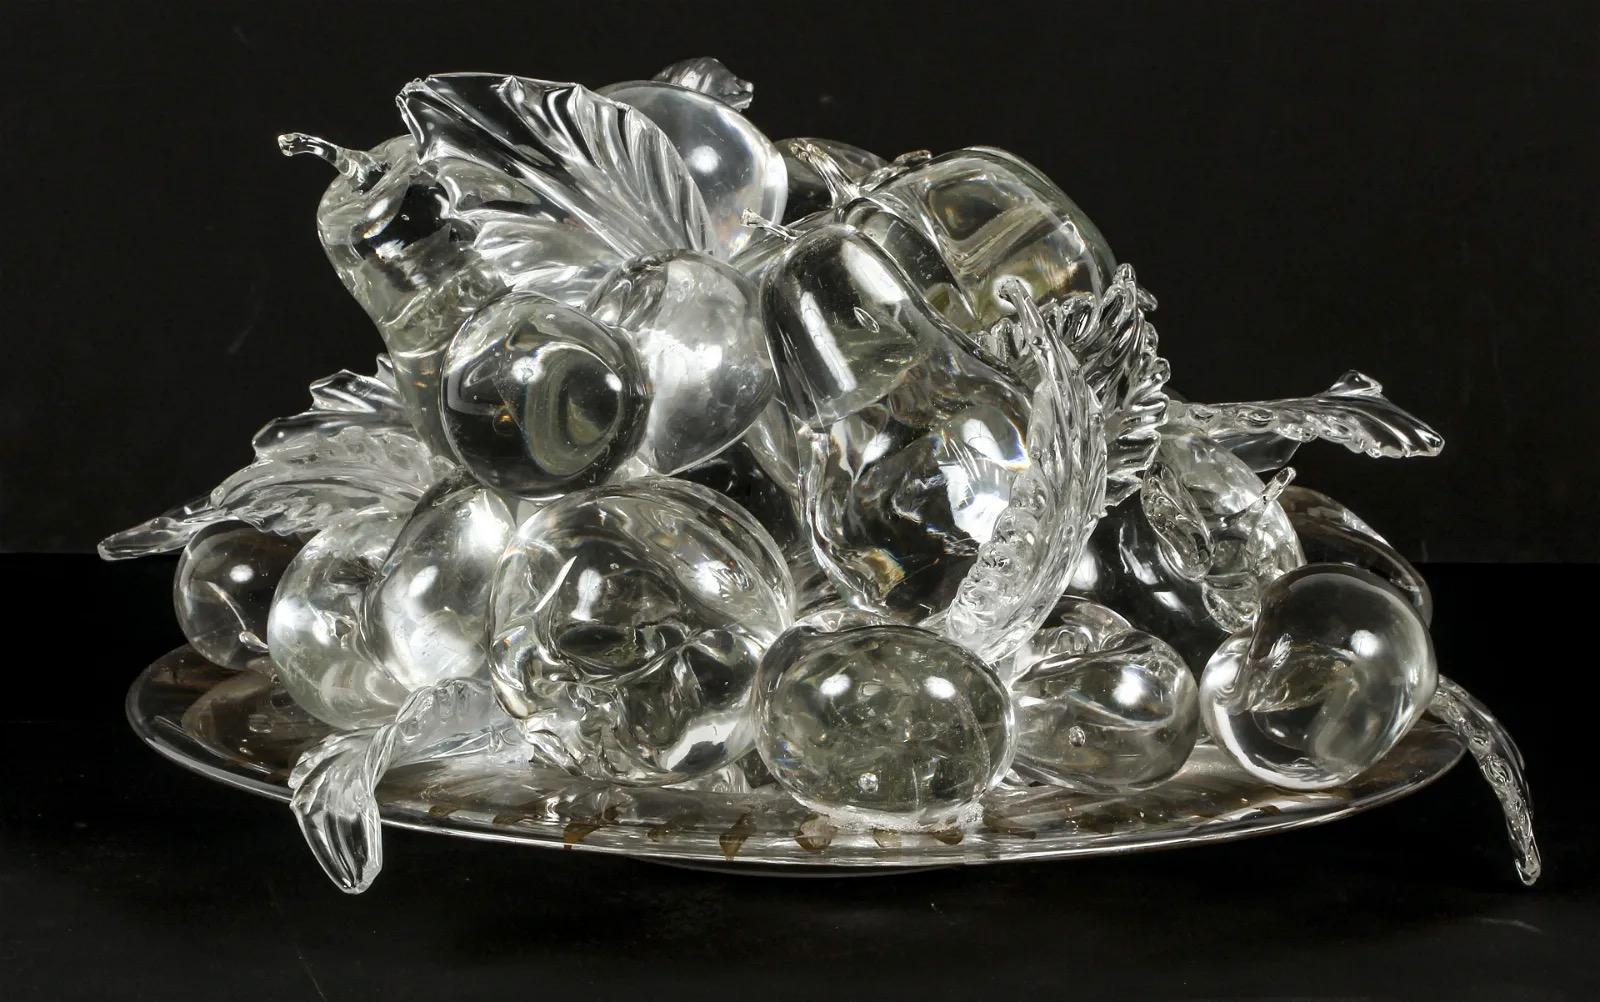 Modern Realistically Blown Glass Realistic Tray Depicting Mixed Fruits by Beth Lipman For Sale